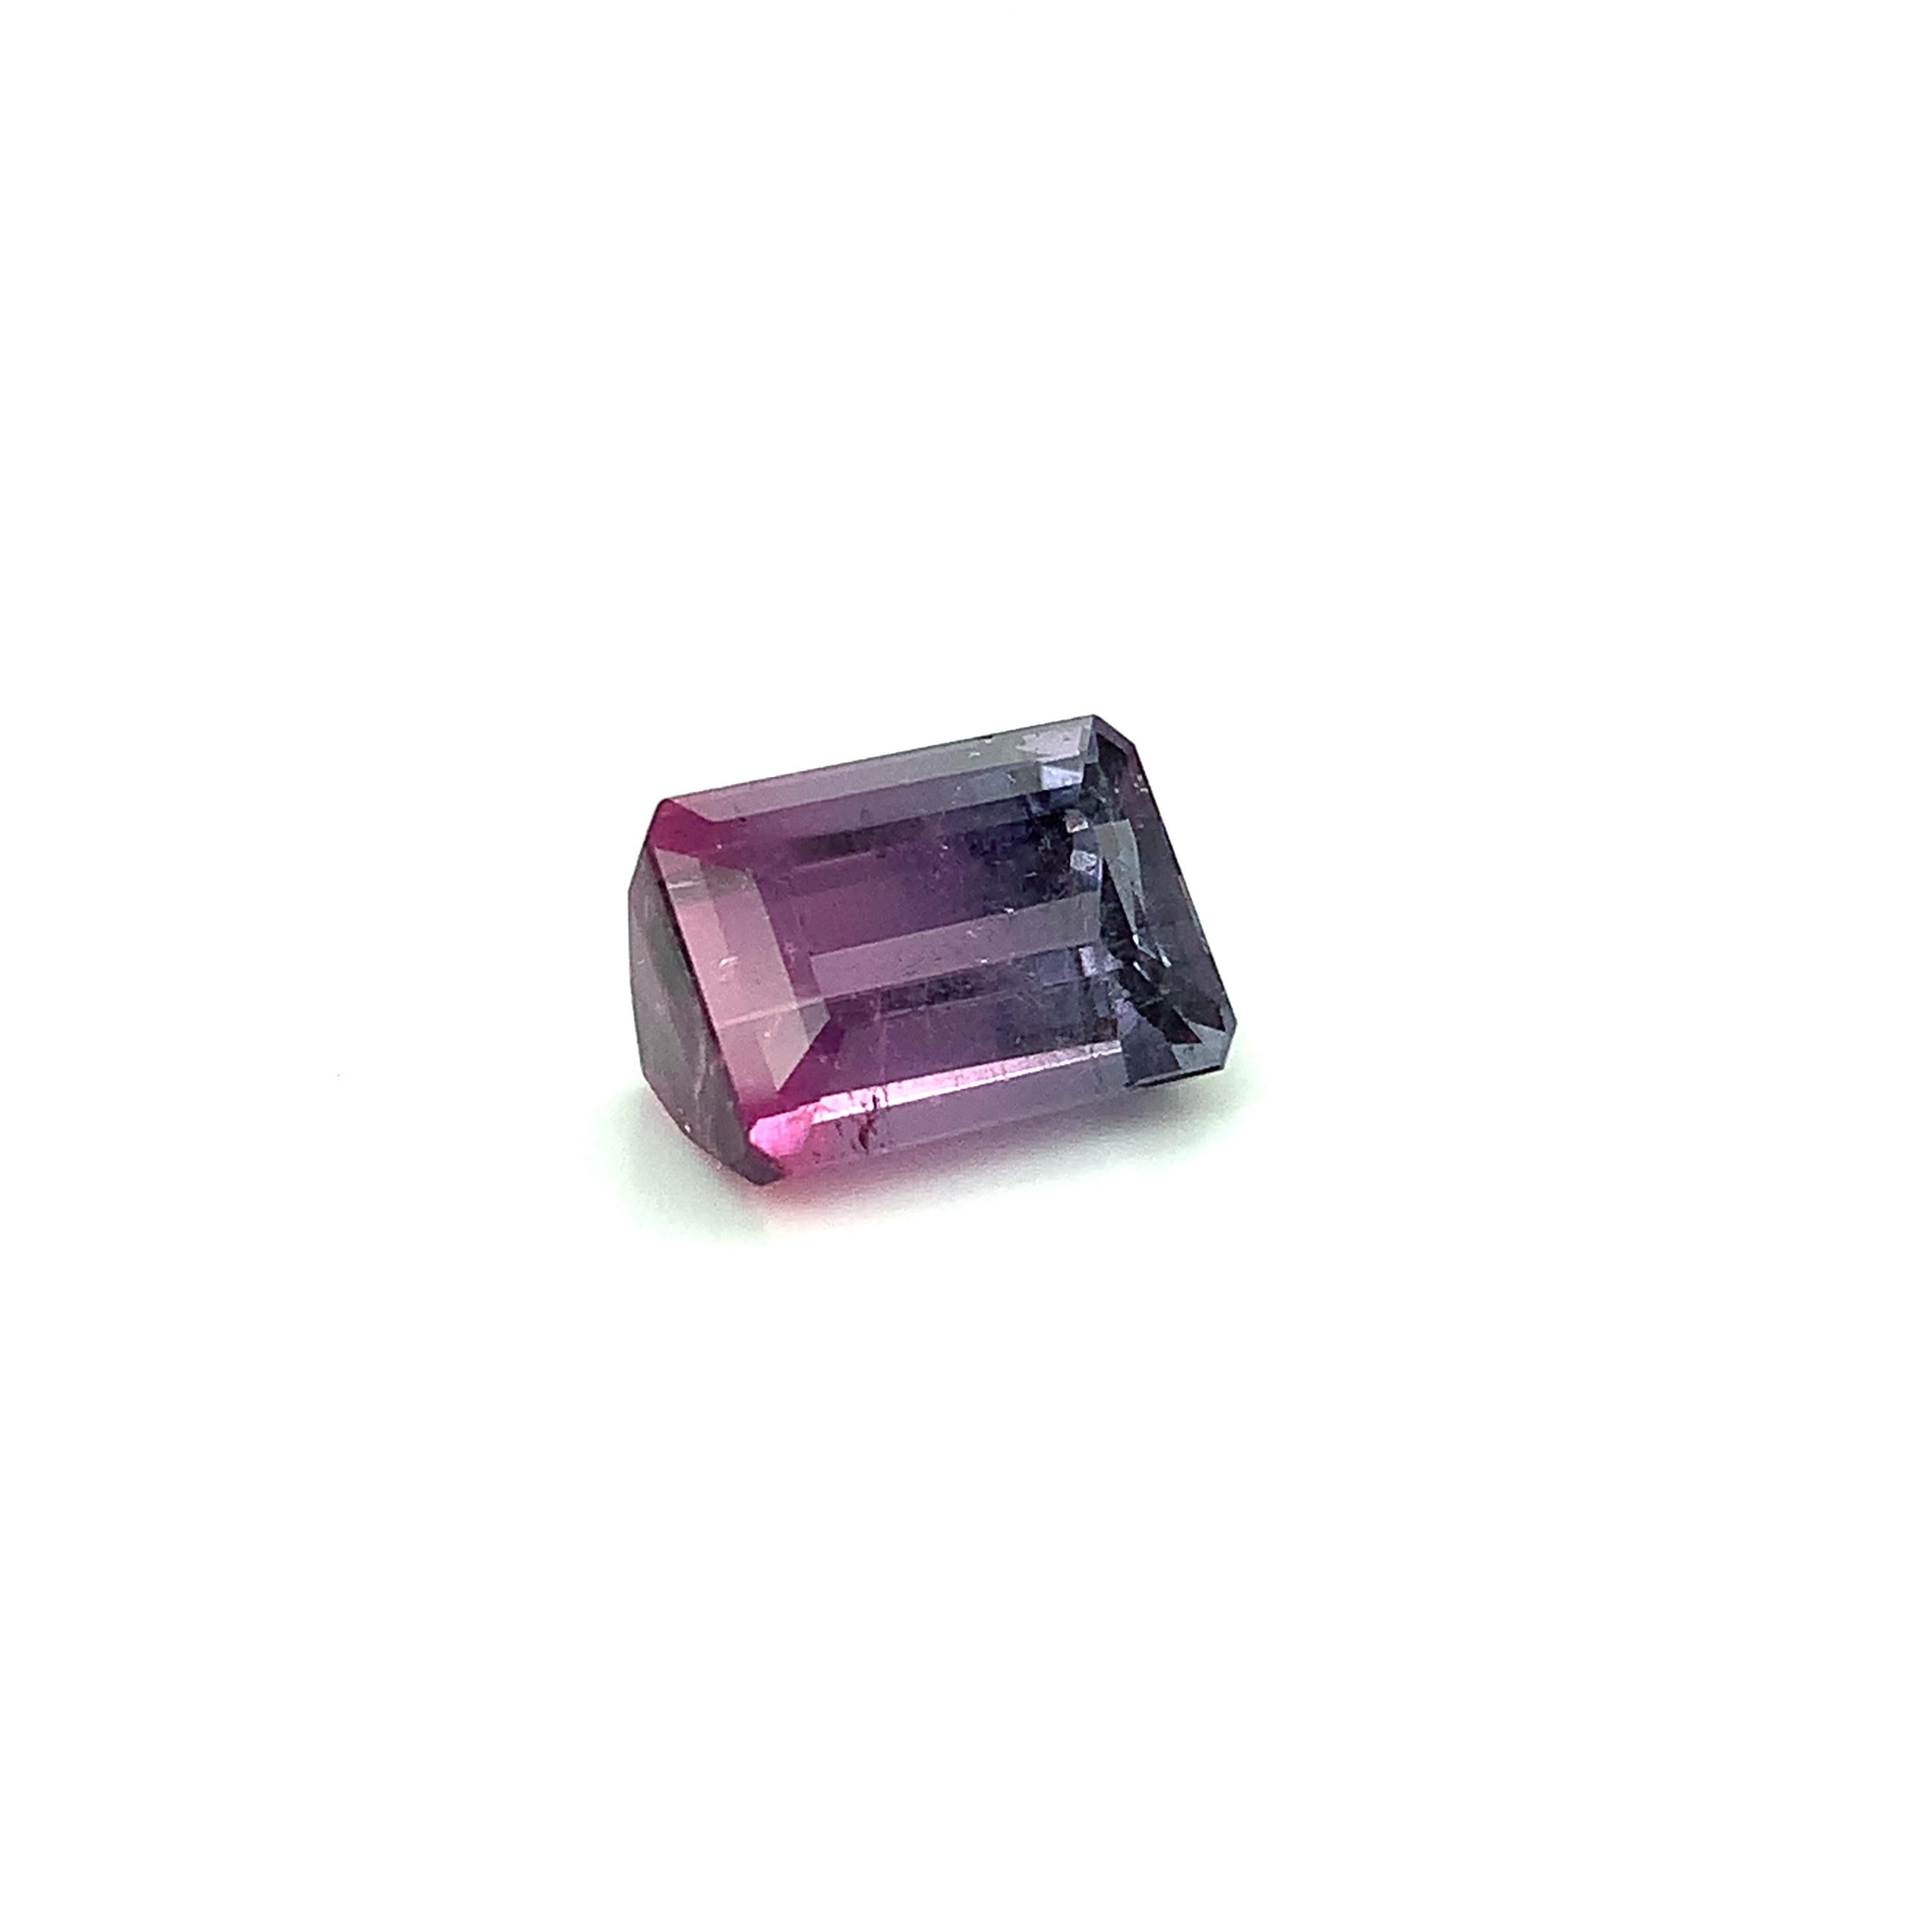 Tourmaline occurs in all colors of the rainbow, but purple tourmaline is quite unusual, especially in clean medium purple hues. This crystalline parti-color purple and pink tourmaline emerald-cut exhibits a beautiful ombre effect of colors,